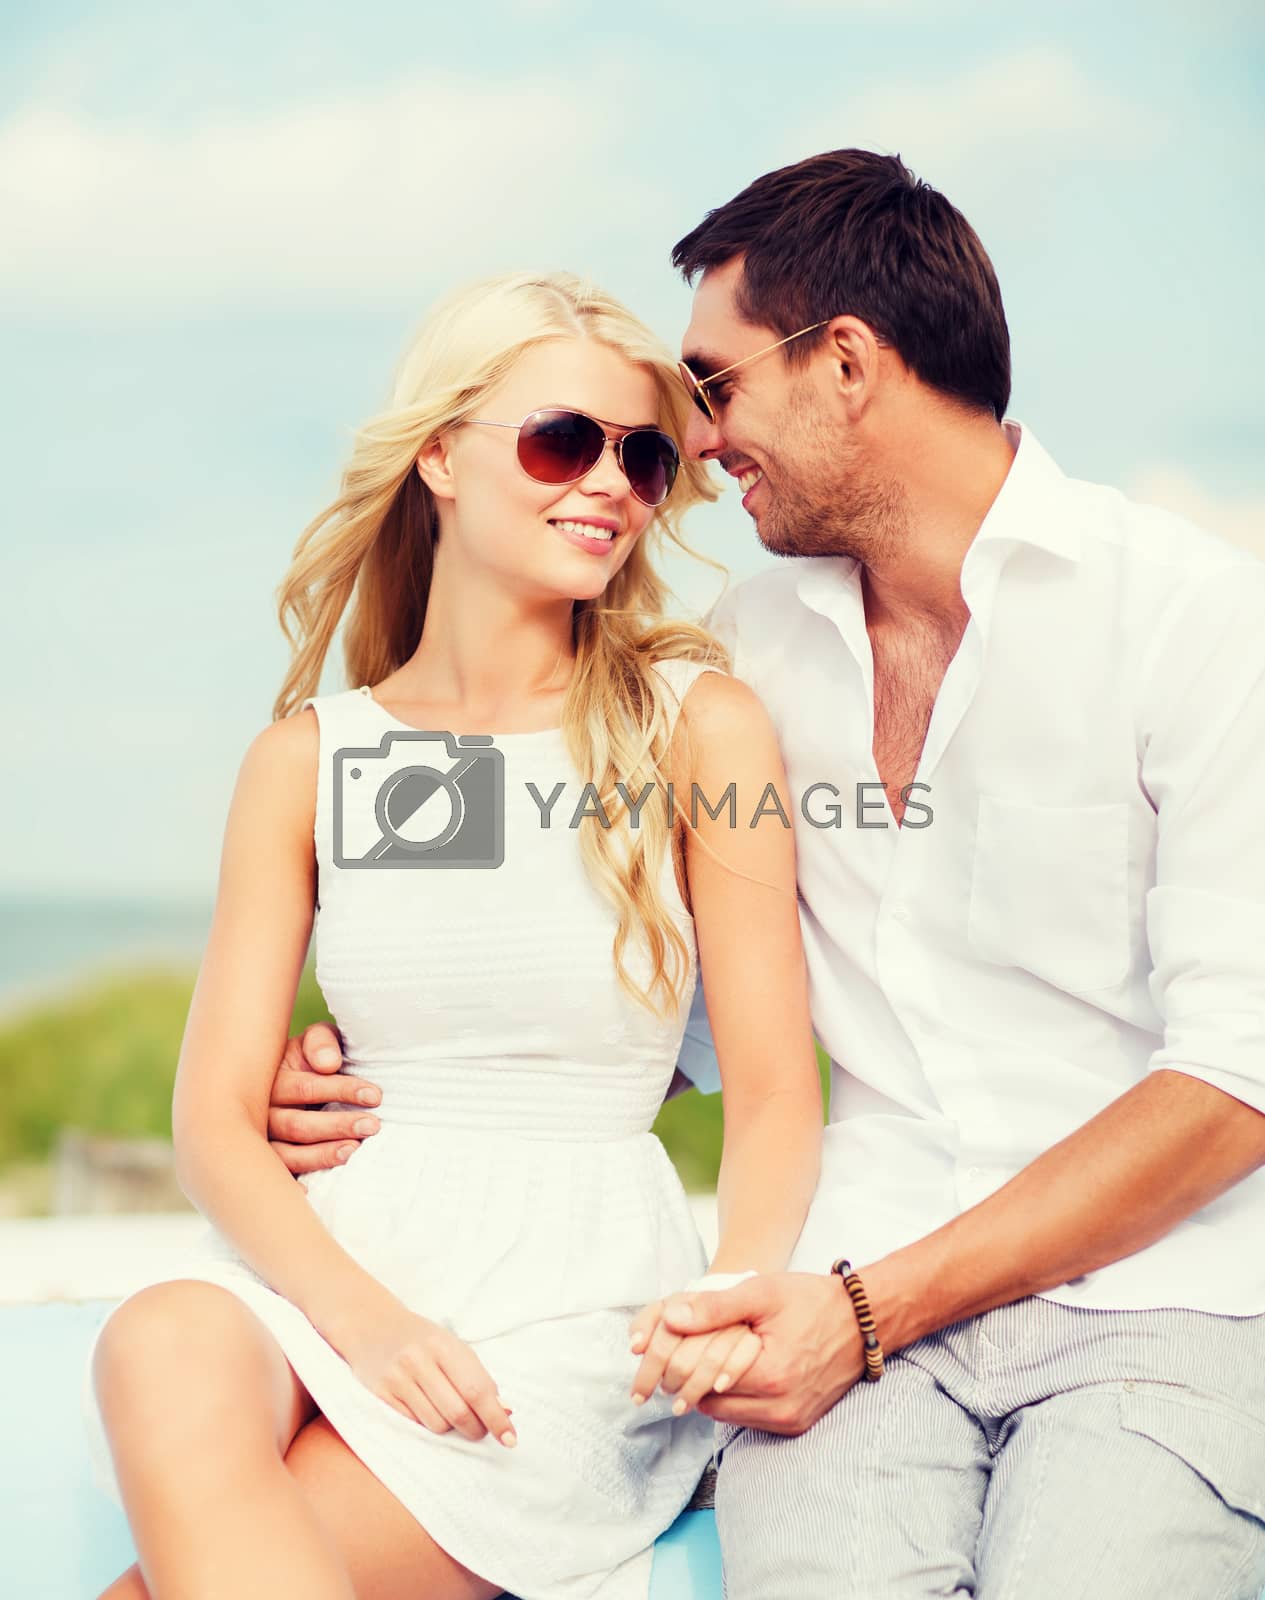 Royalty free image of couple in shades at seaside by dolgachov